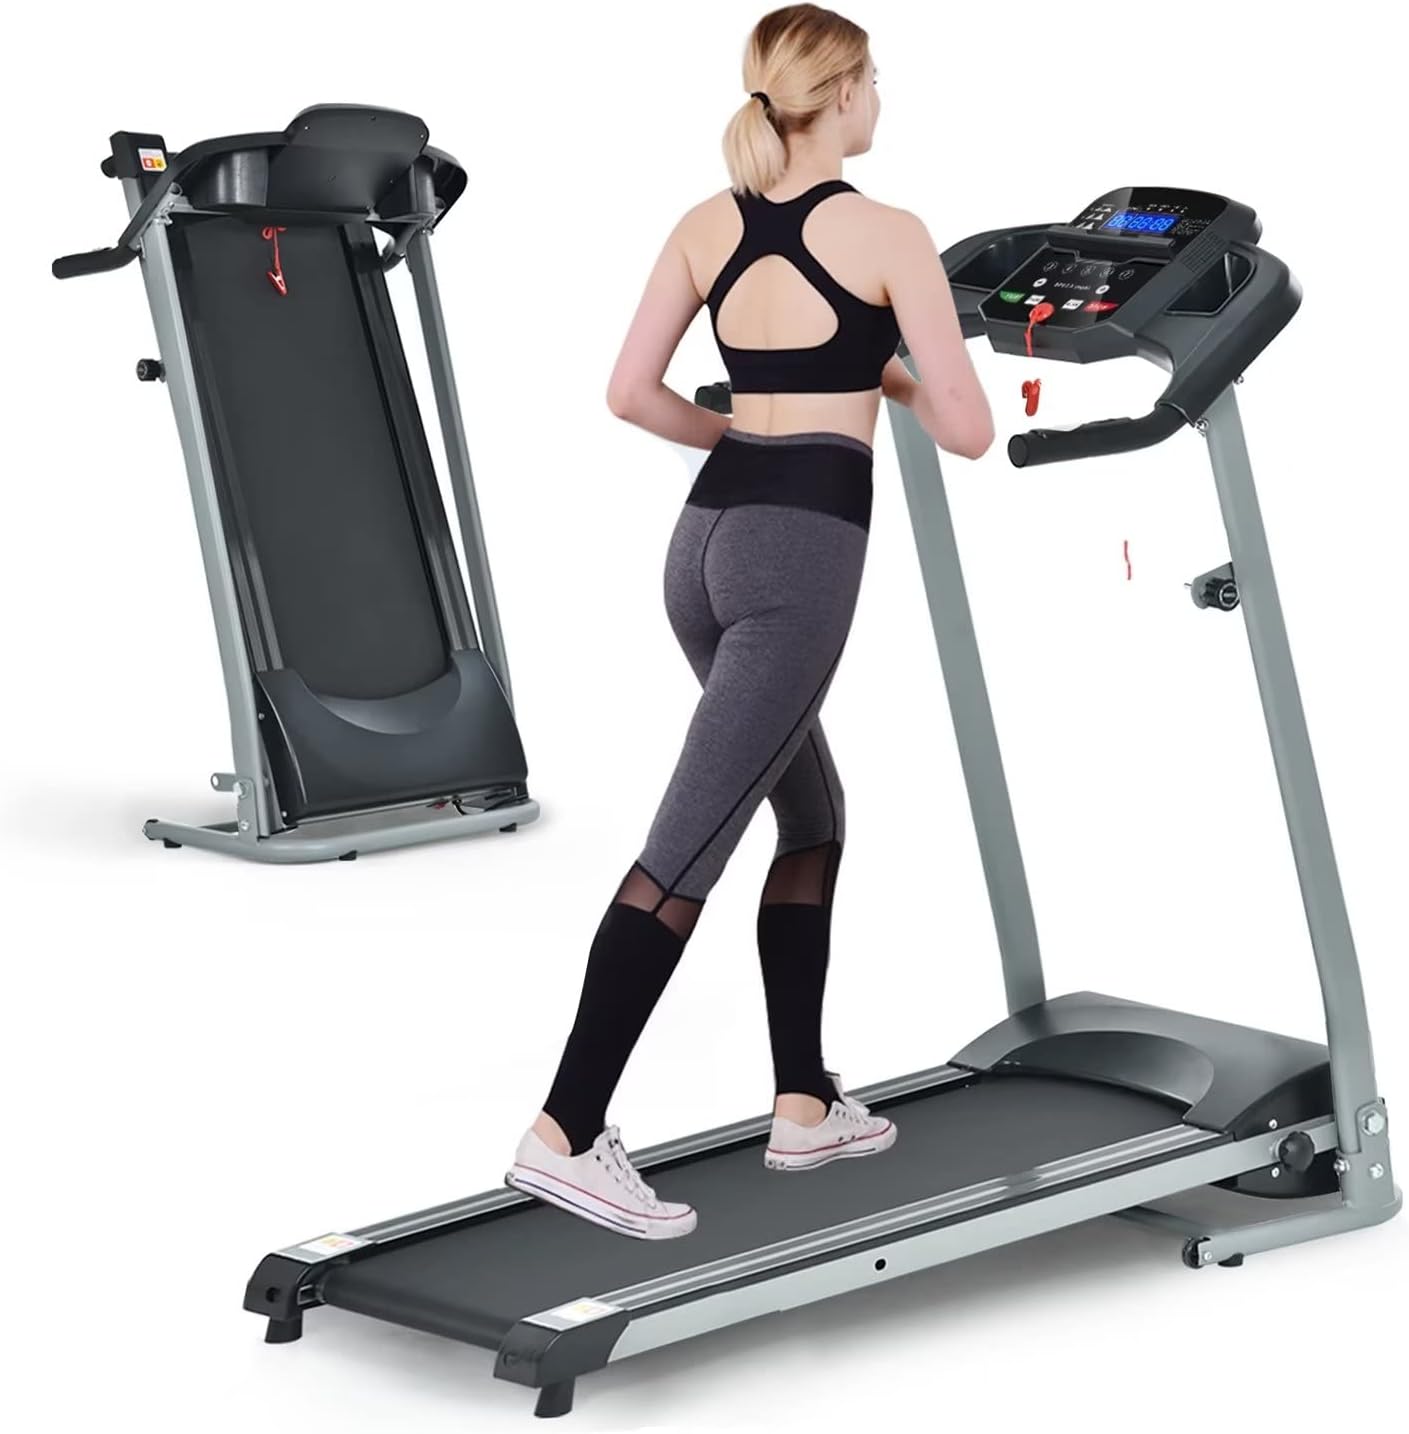 Treadmill,Treadmills for Home,Home Foldable Treadmill with Incline,2.5HP Portable Foldable Treadmill with 15 Pre Set Programs and LED Display Panel